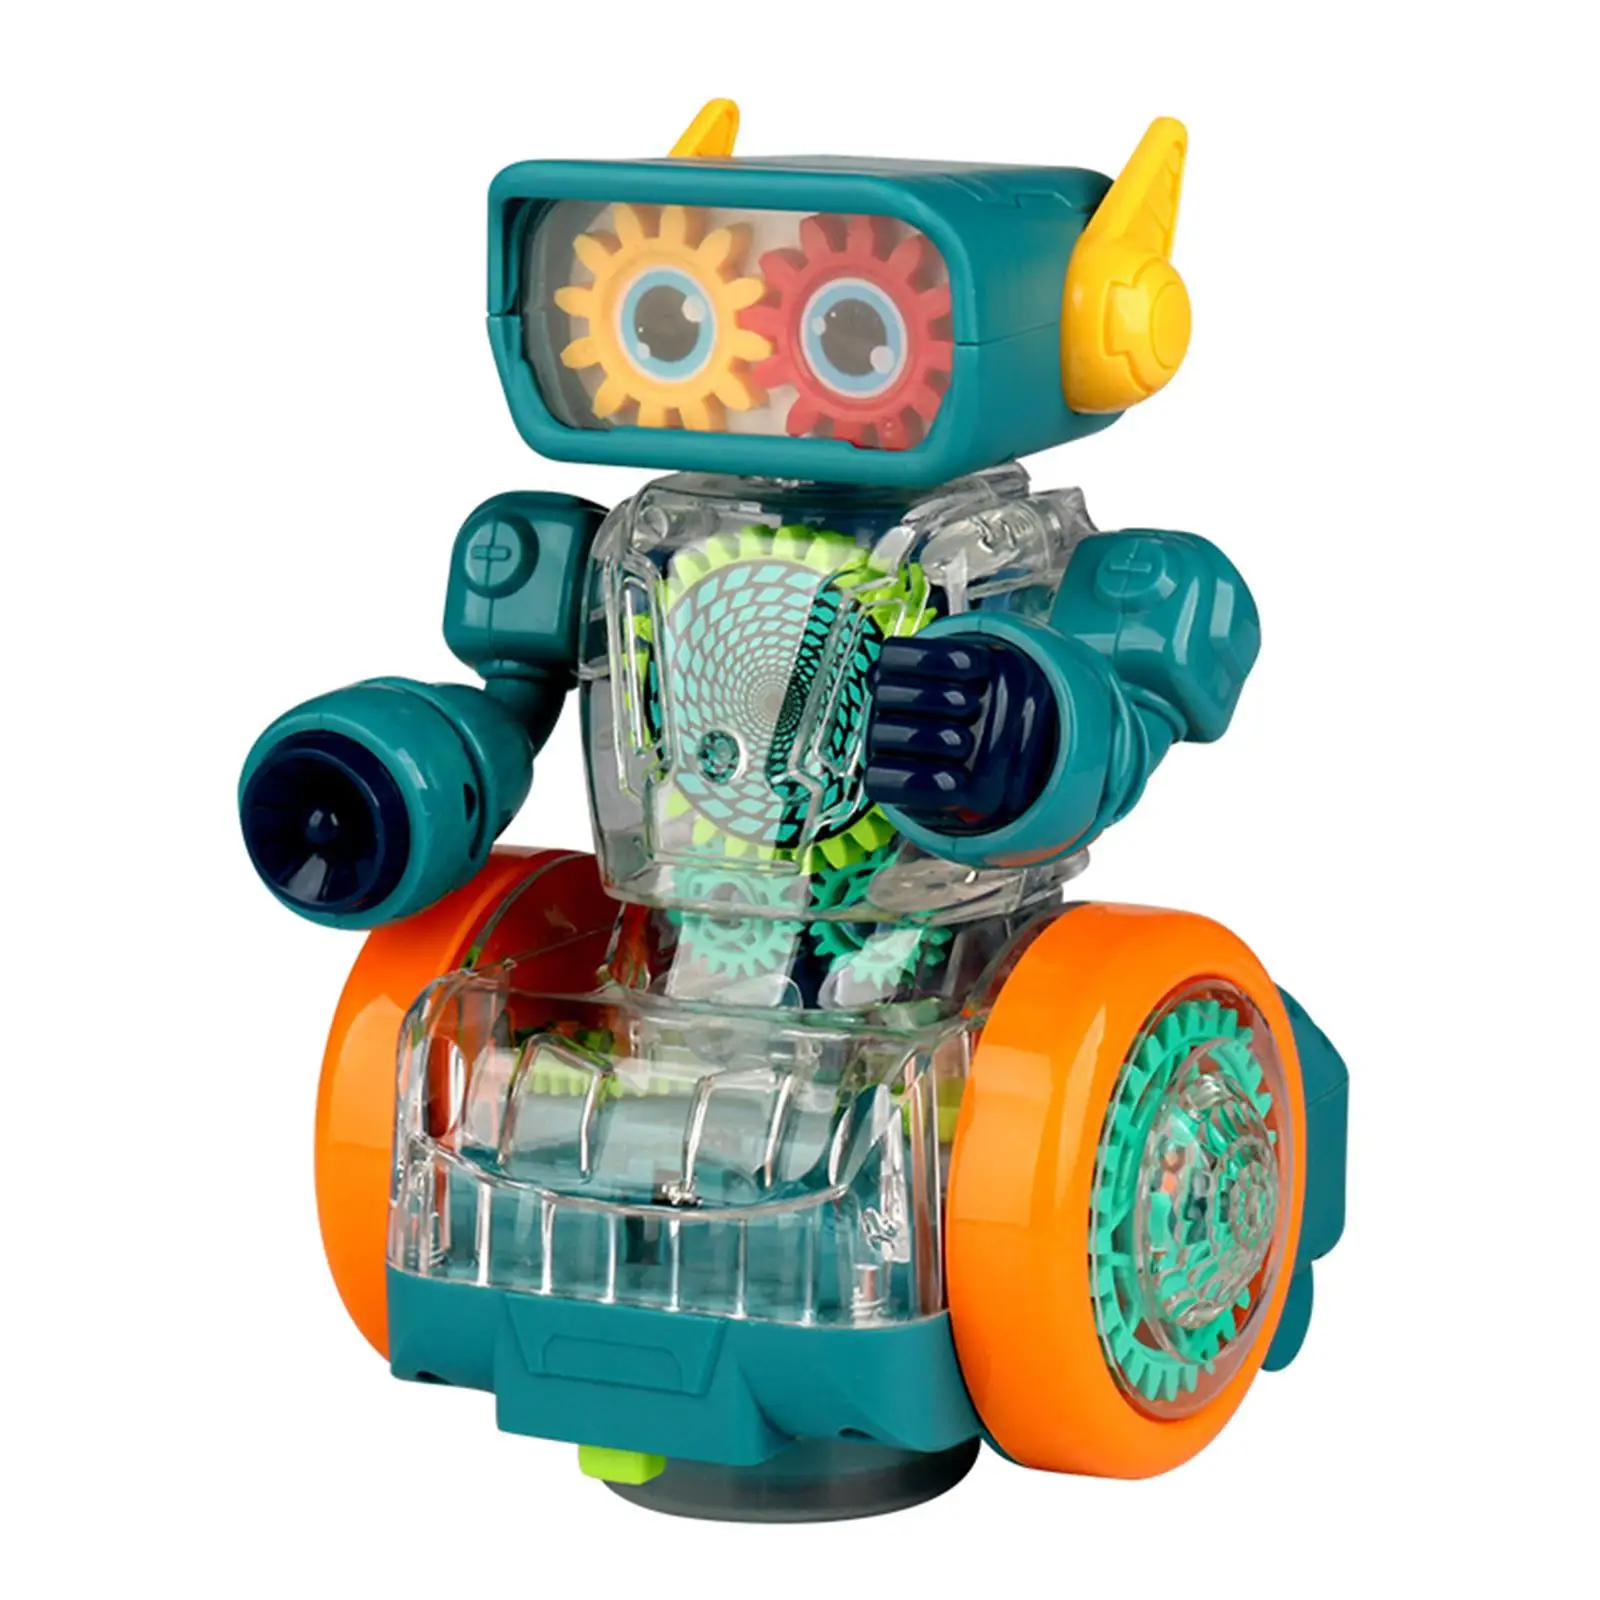 Electric Mechanical Gear Robot Toy with Moving Gears with Music Early Educational Toys for Toddlers Boys Children Kids Gifts